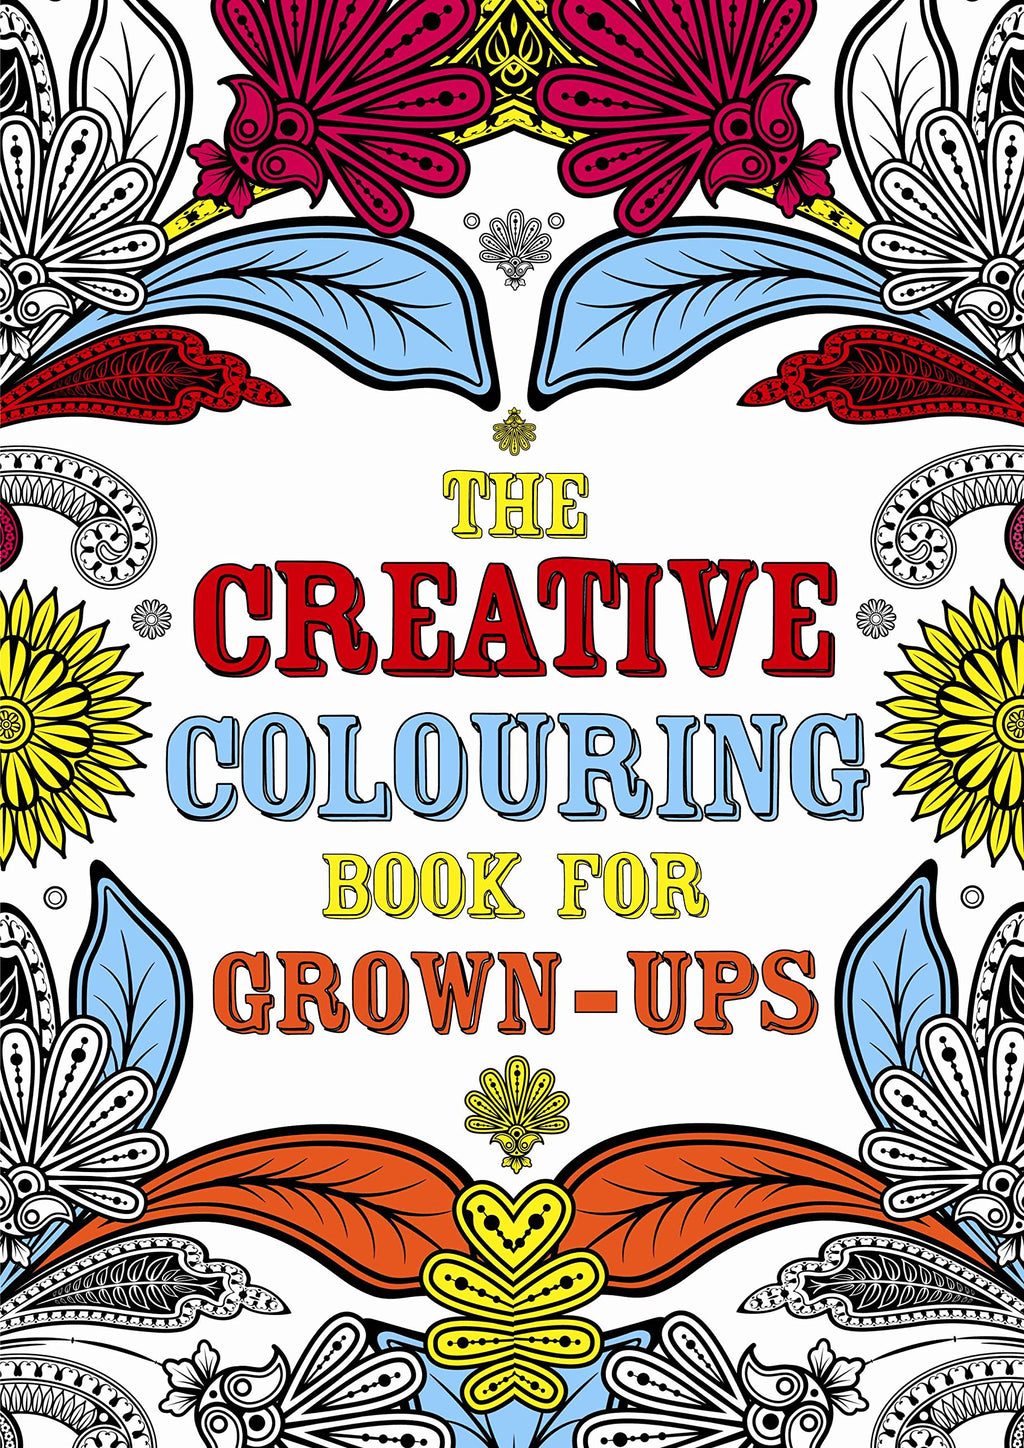 Creative Colouring Book for Grown-Ups